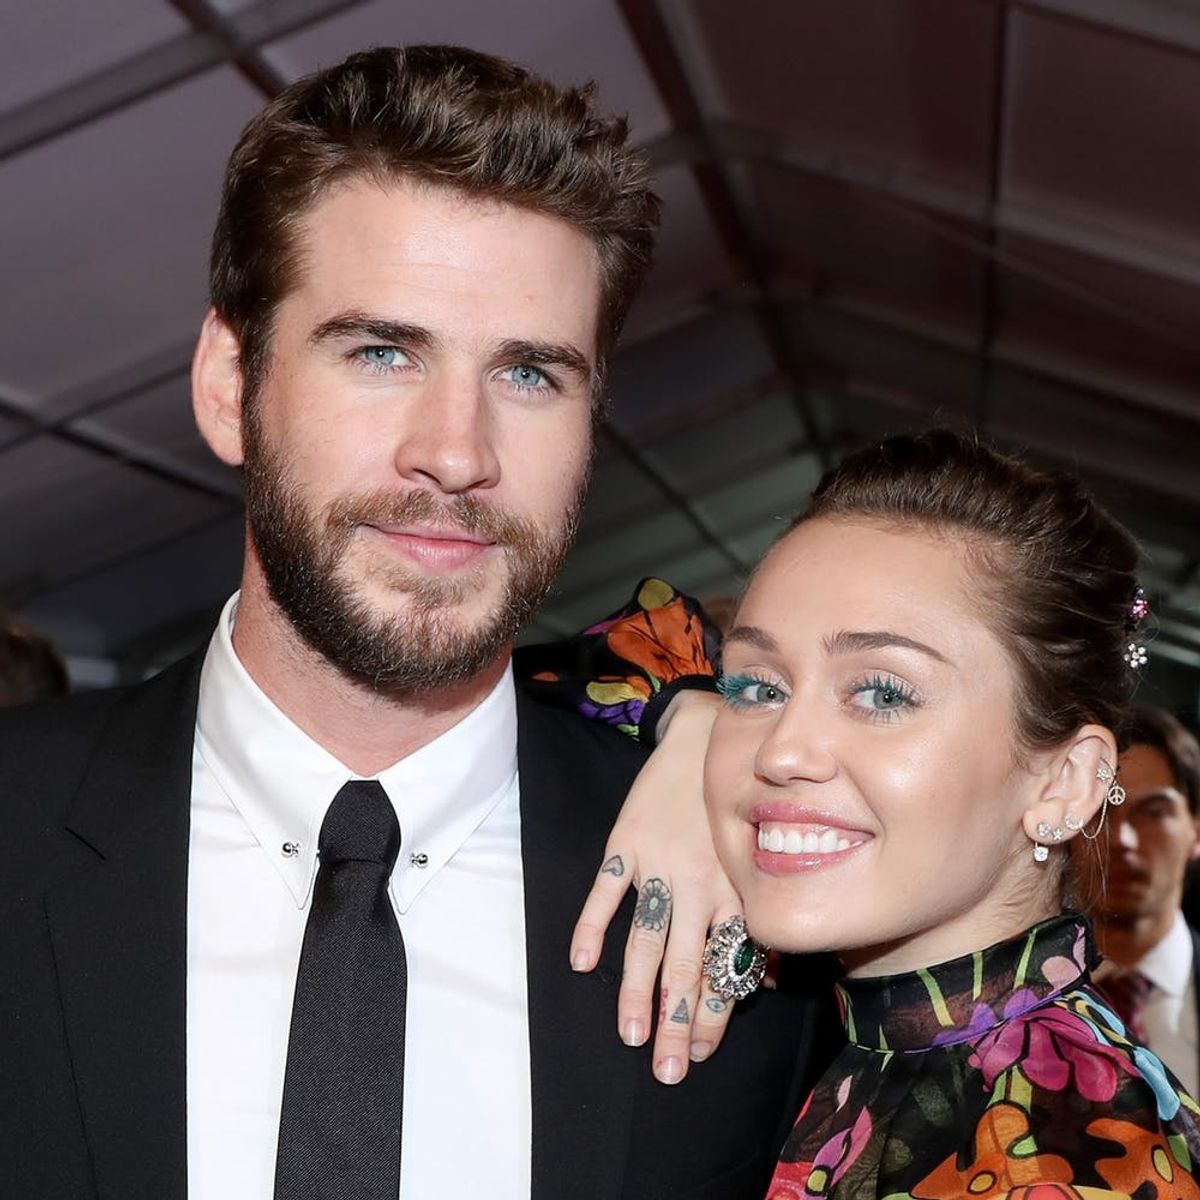 Liam Hemsworth Gave Miley Cyrus a Personalized Necklace for Her Birthday With *This* Sweet Detail